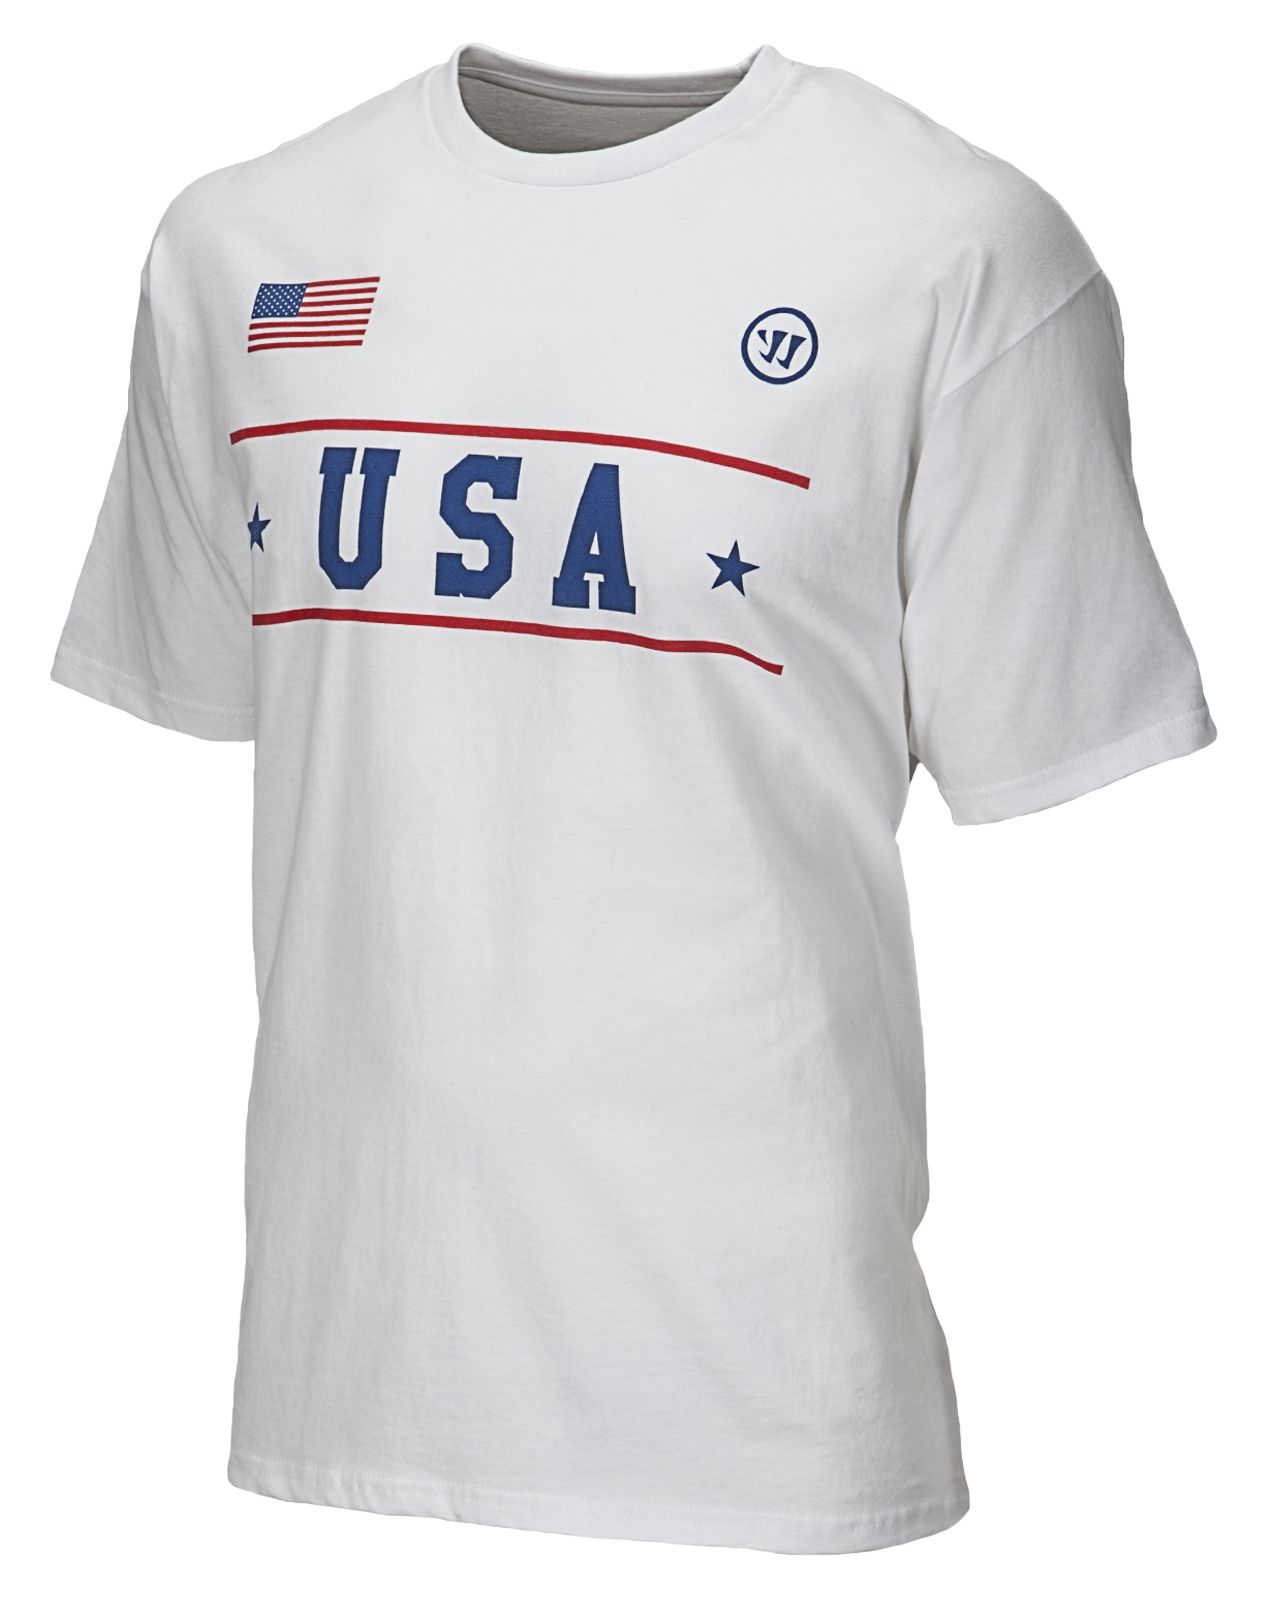 Team USA Tee, White with Red & Blue image number 1